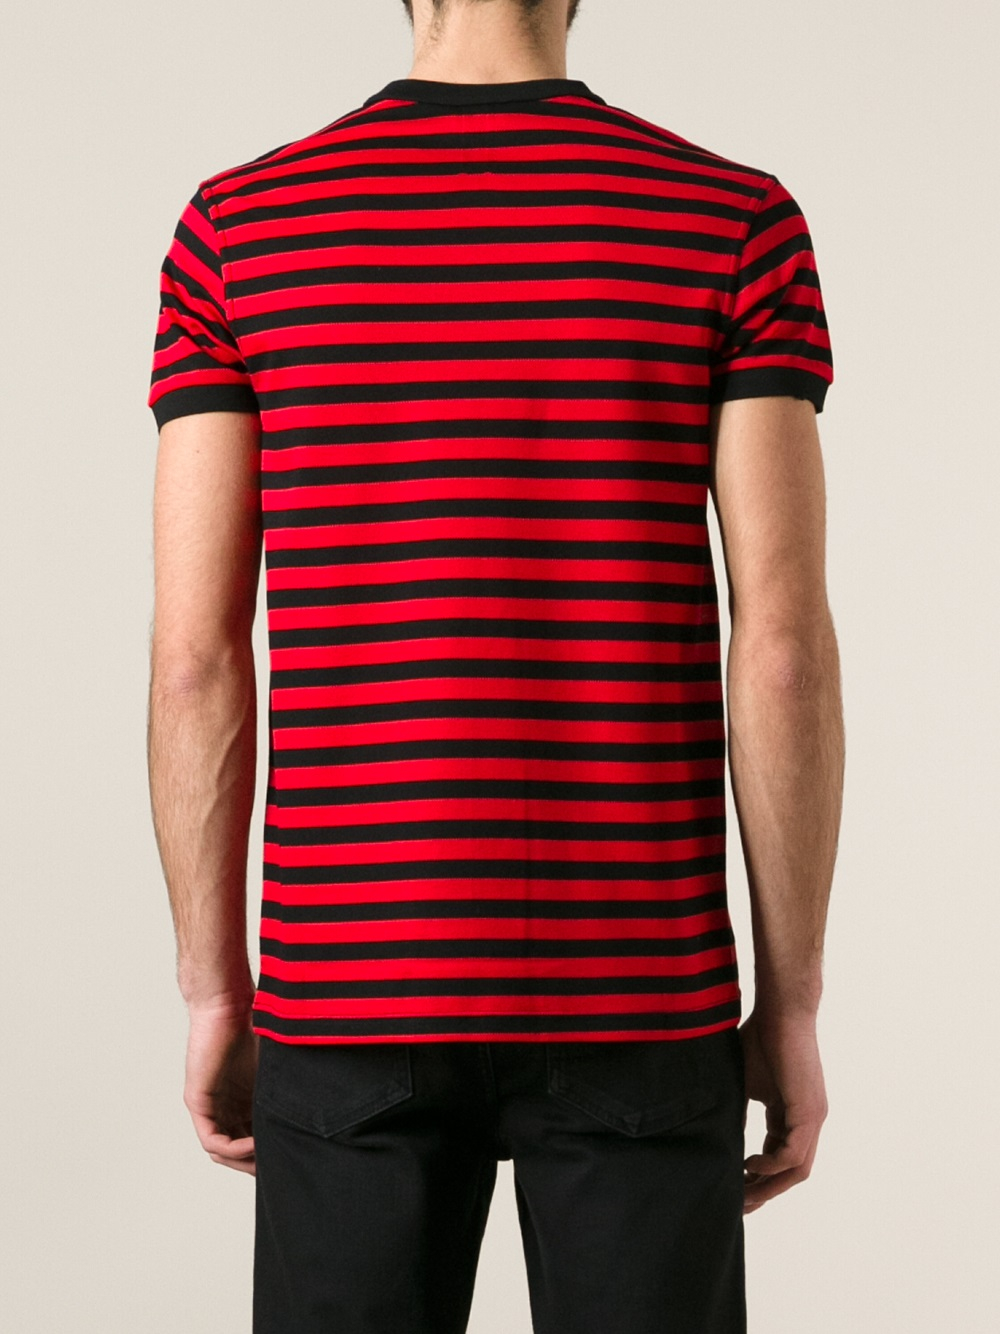 Saint Laurent Striped Polo Shirt in Red for Men | Lyst